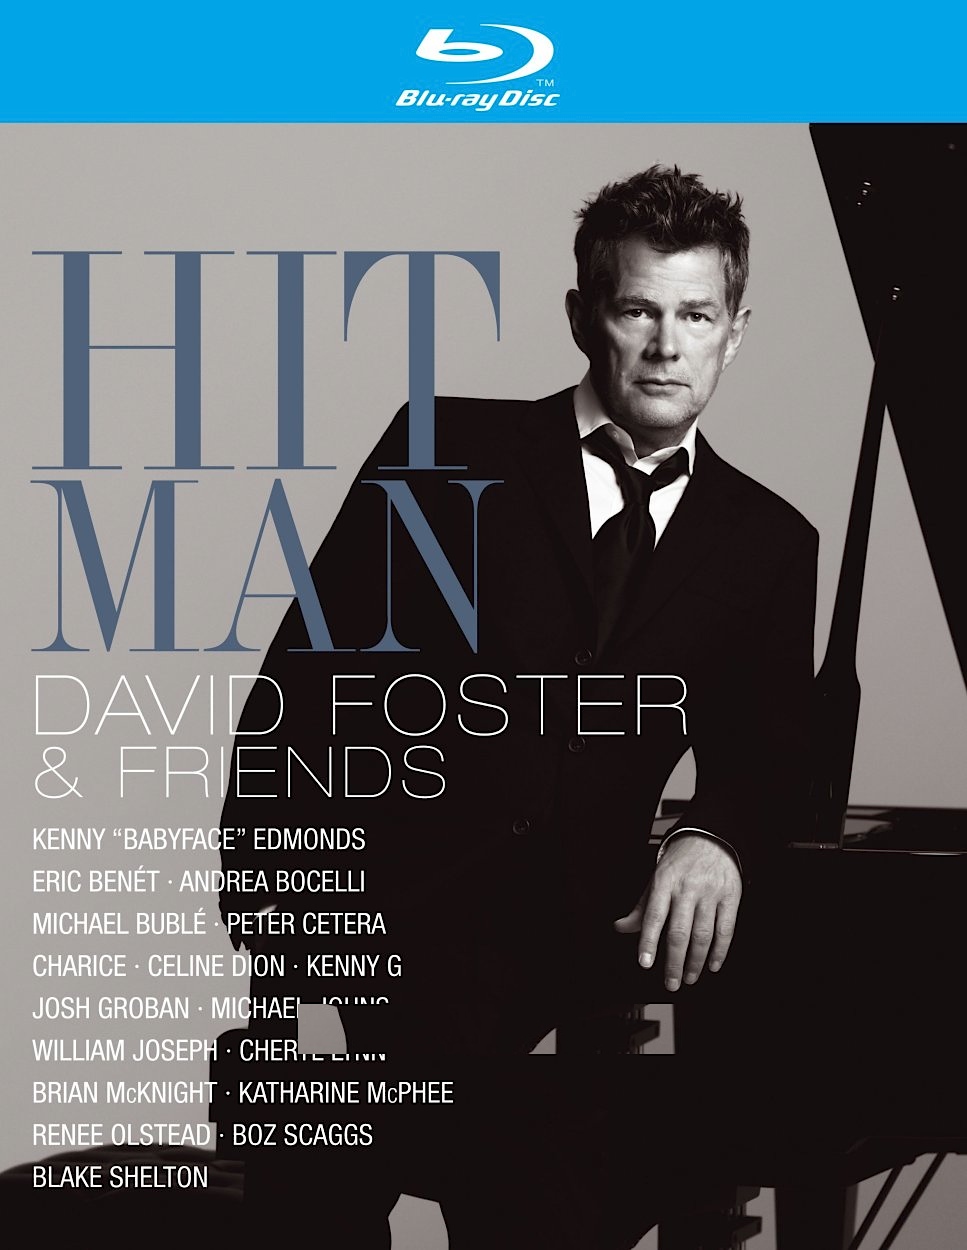 ˹ǵ硷Hit Man: David Foster and Friends 720P DTS